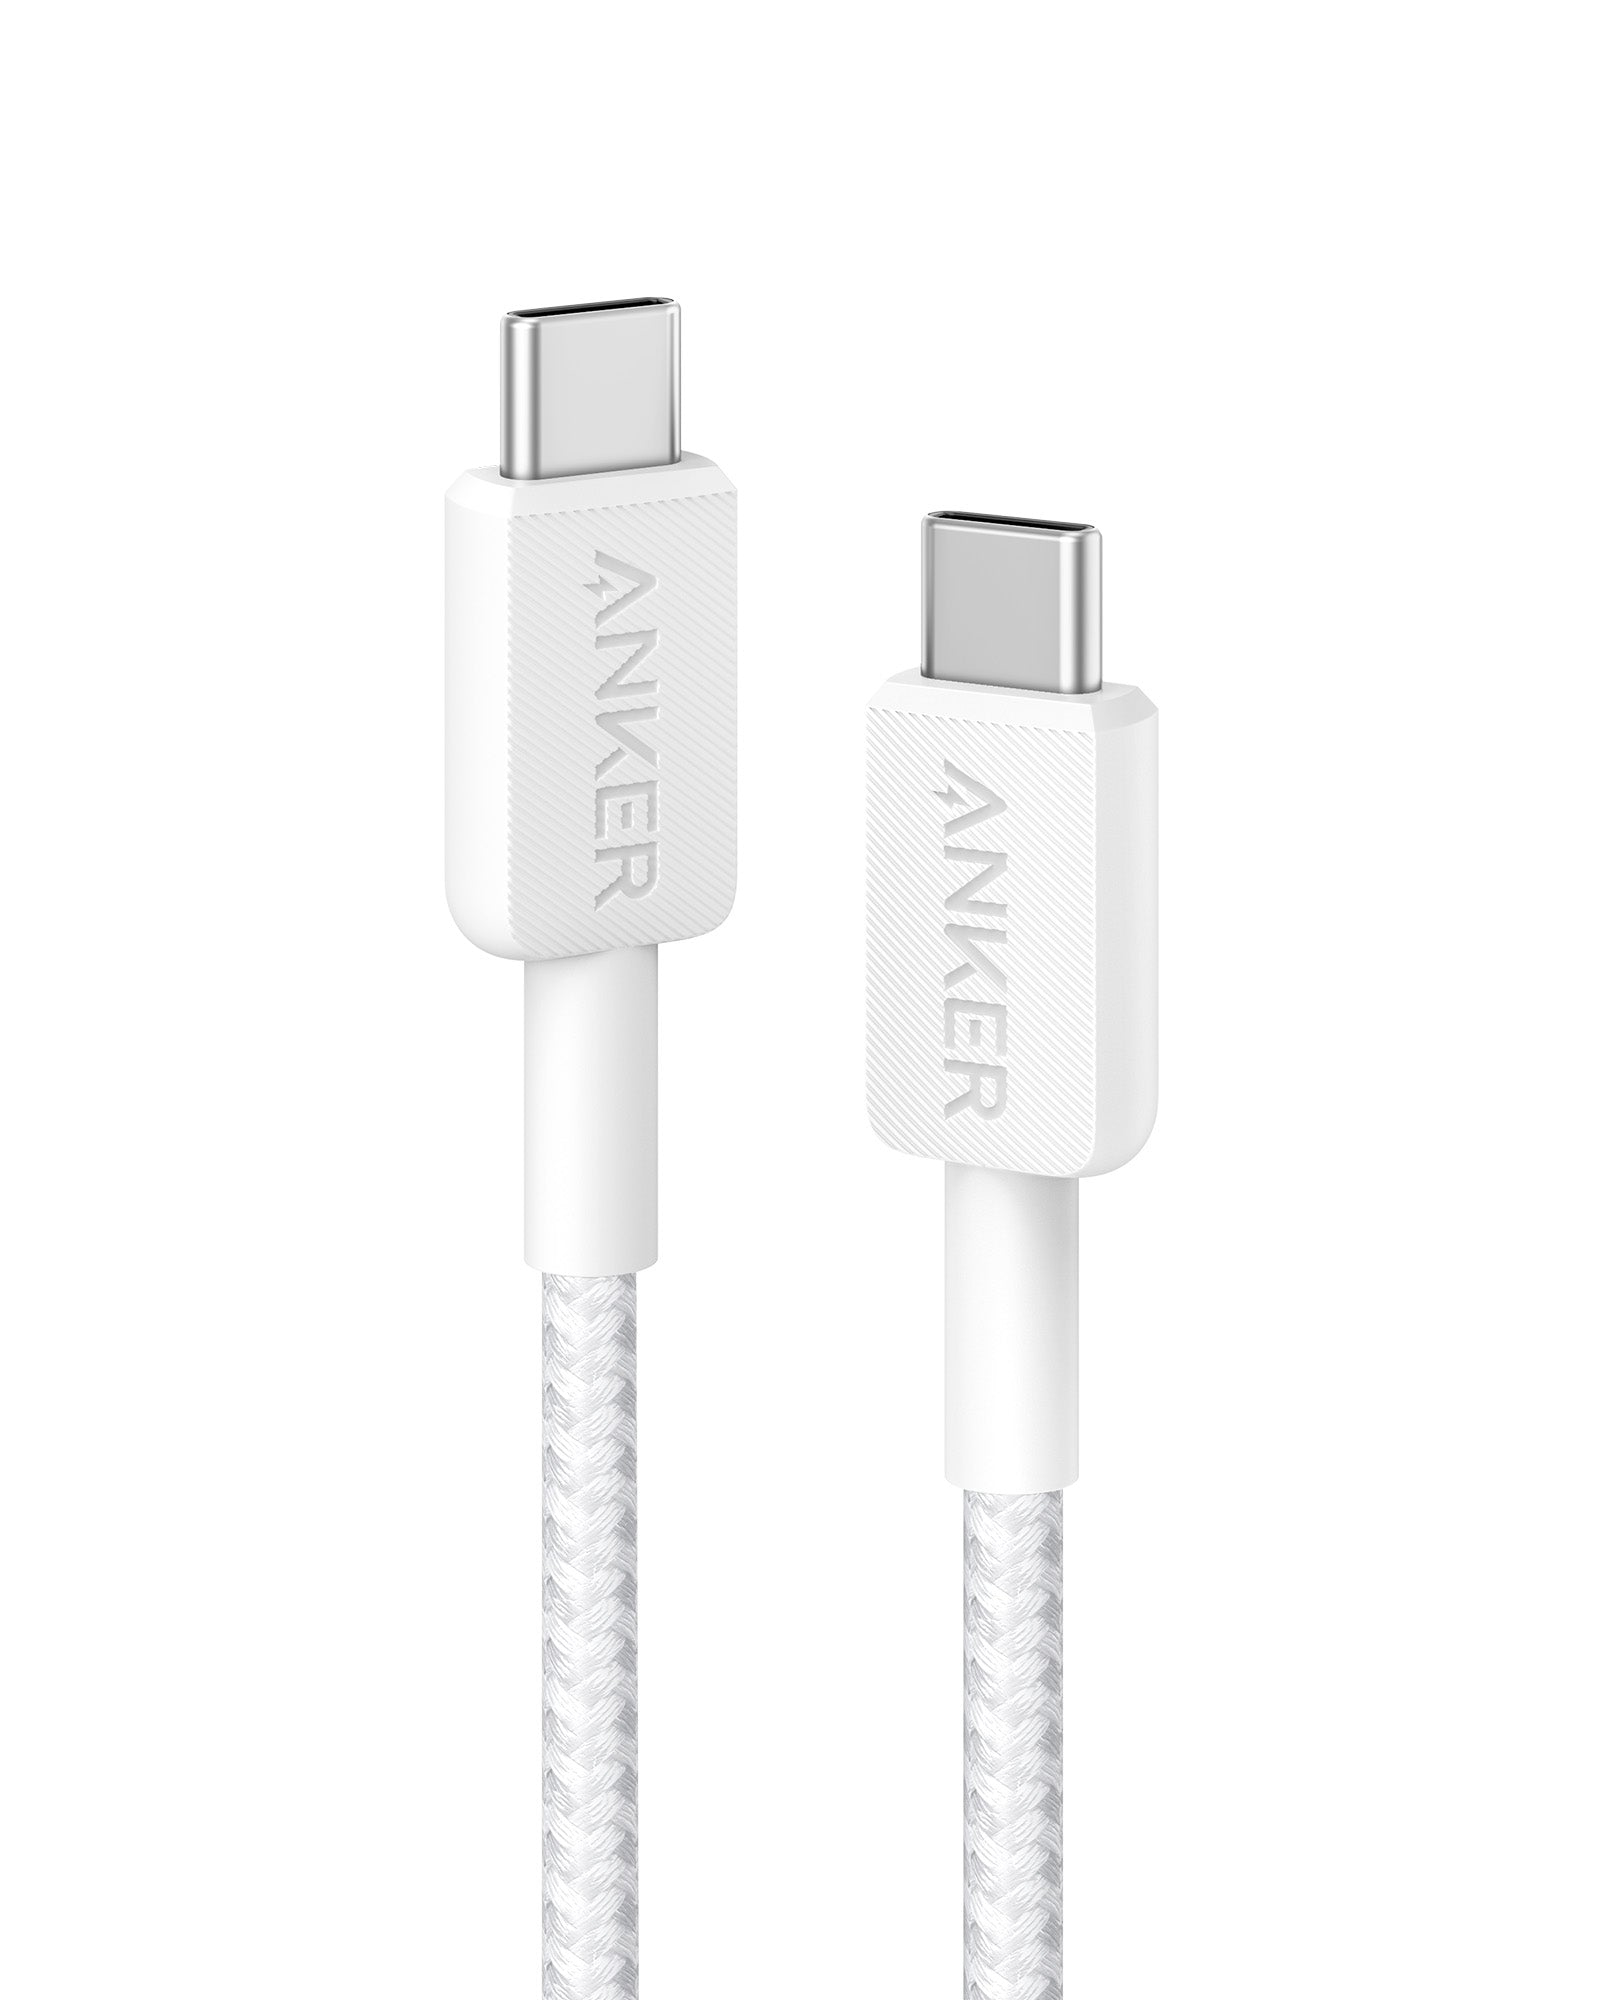 Photos - Cable (video, audio, USB) ANKER A81F5G21 USB cable 0.9 m USB C White 